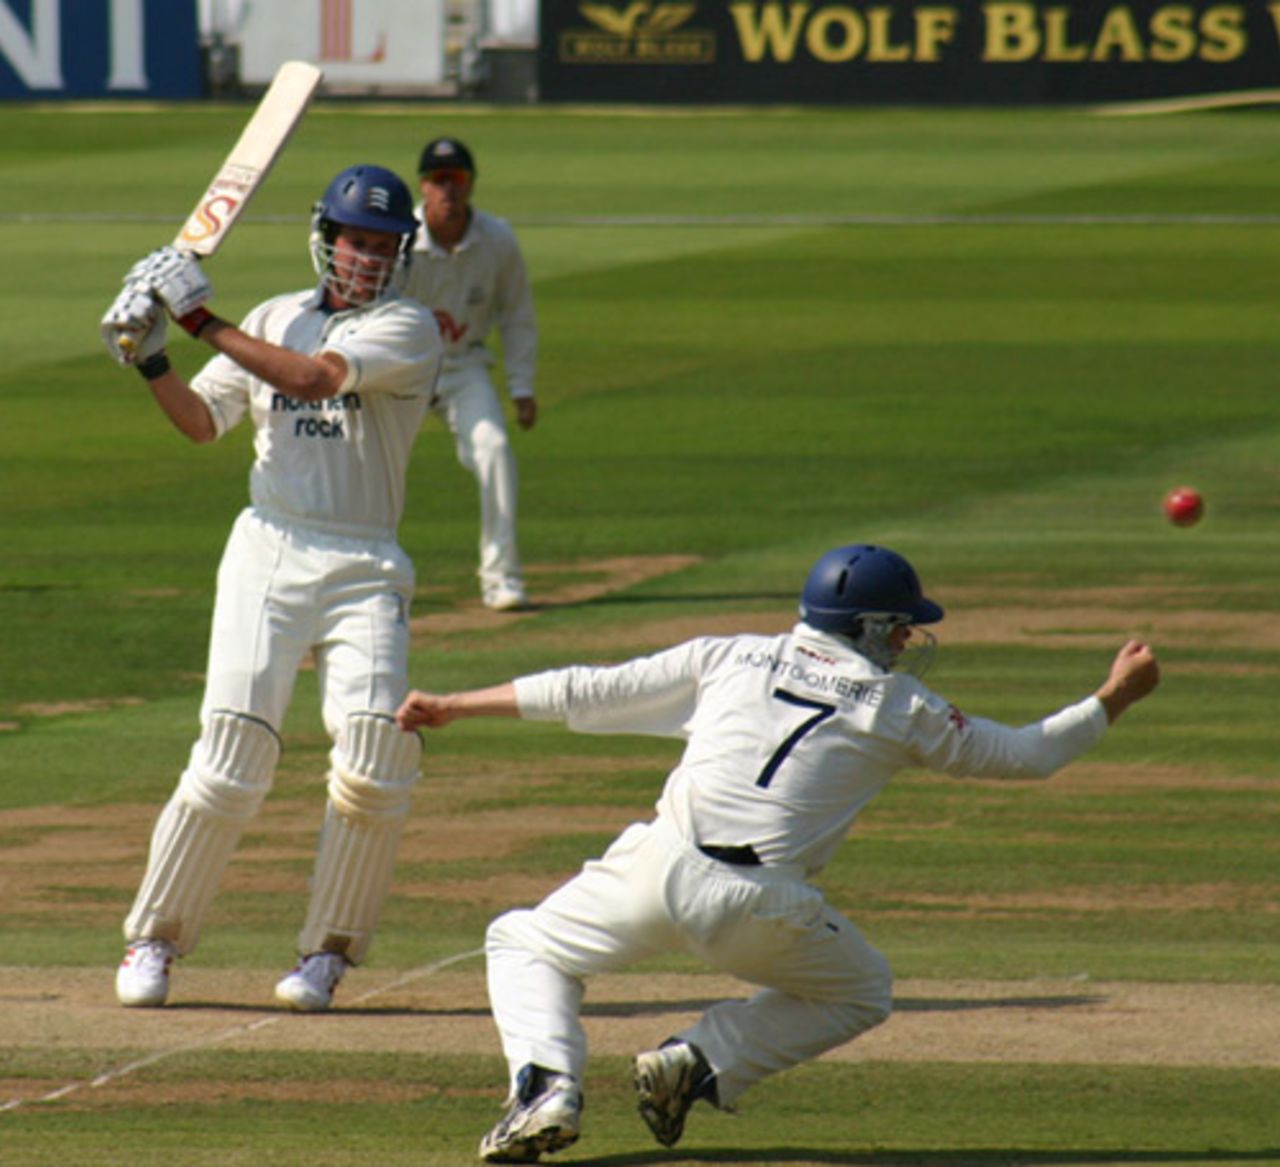 Richard Montgomerie narrowly misses catching Chris Peploe, Middlesex v Sussex, Lord's, August 17, 2005